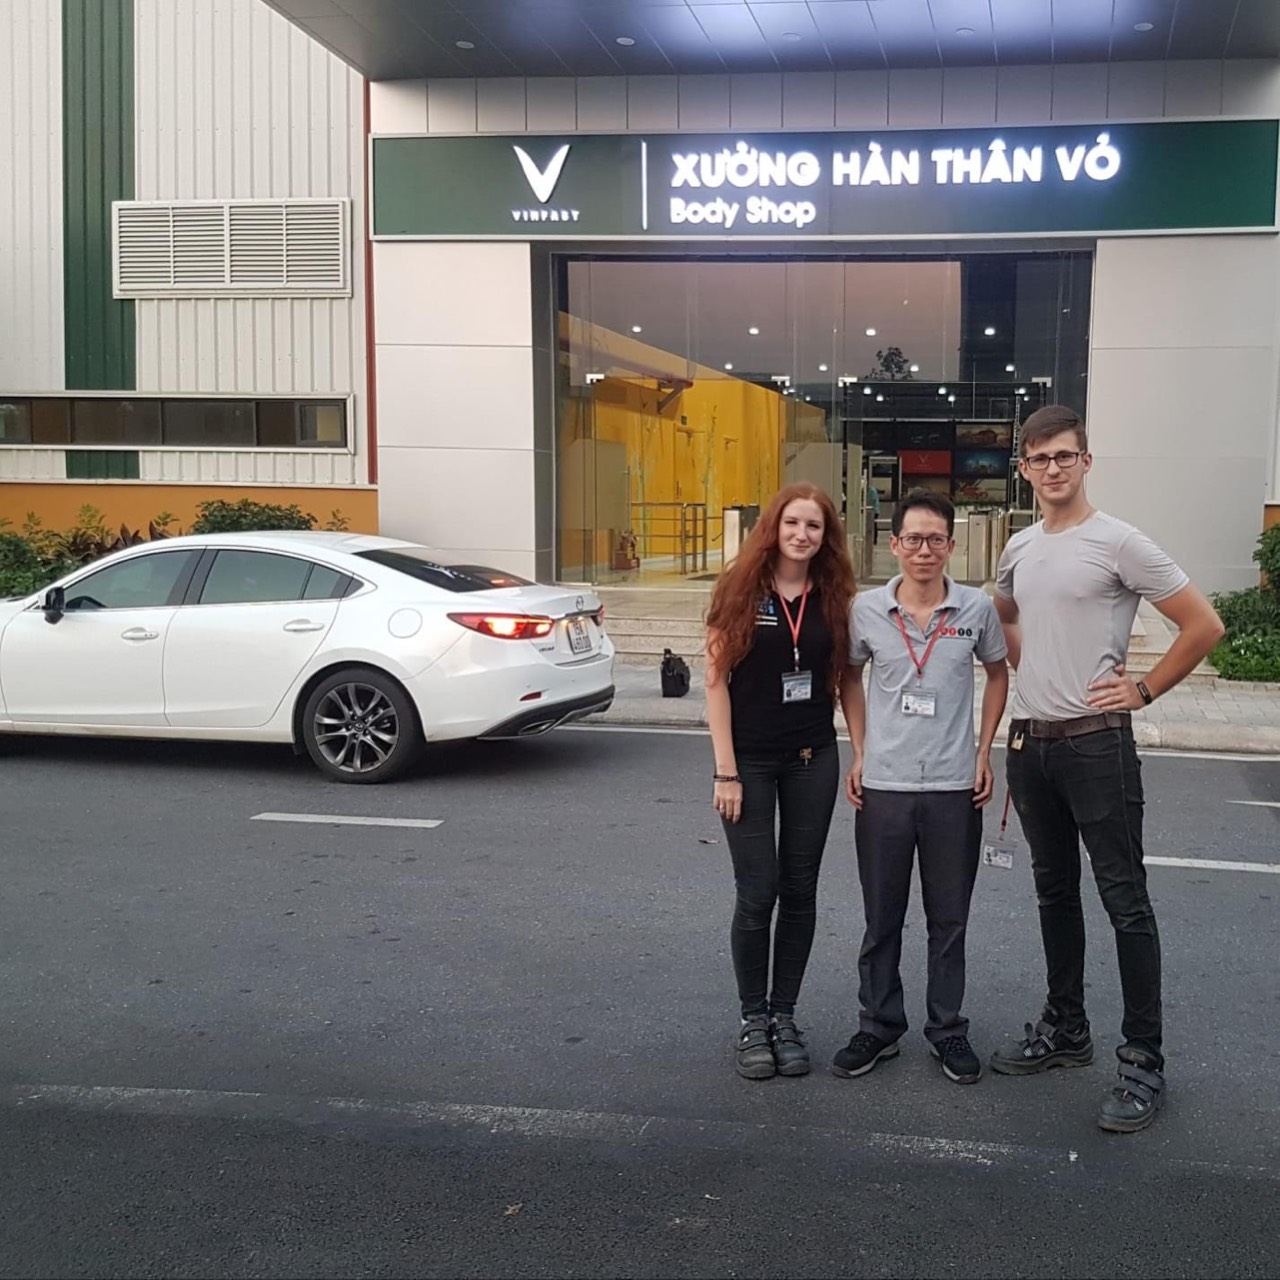 ATTS member with foreign colleagues outside VinFast Body Shop